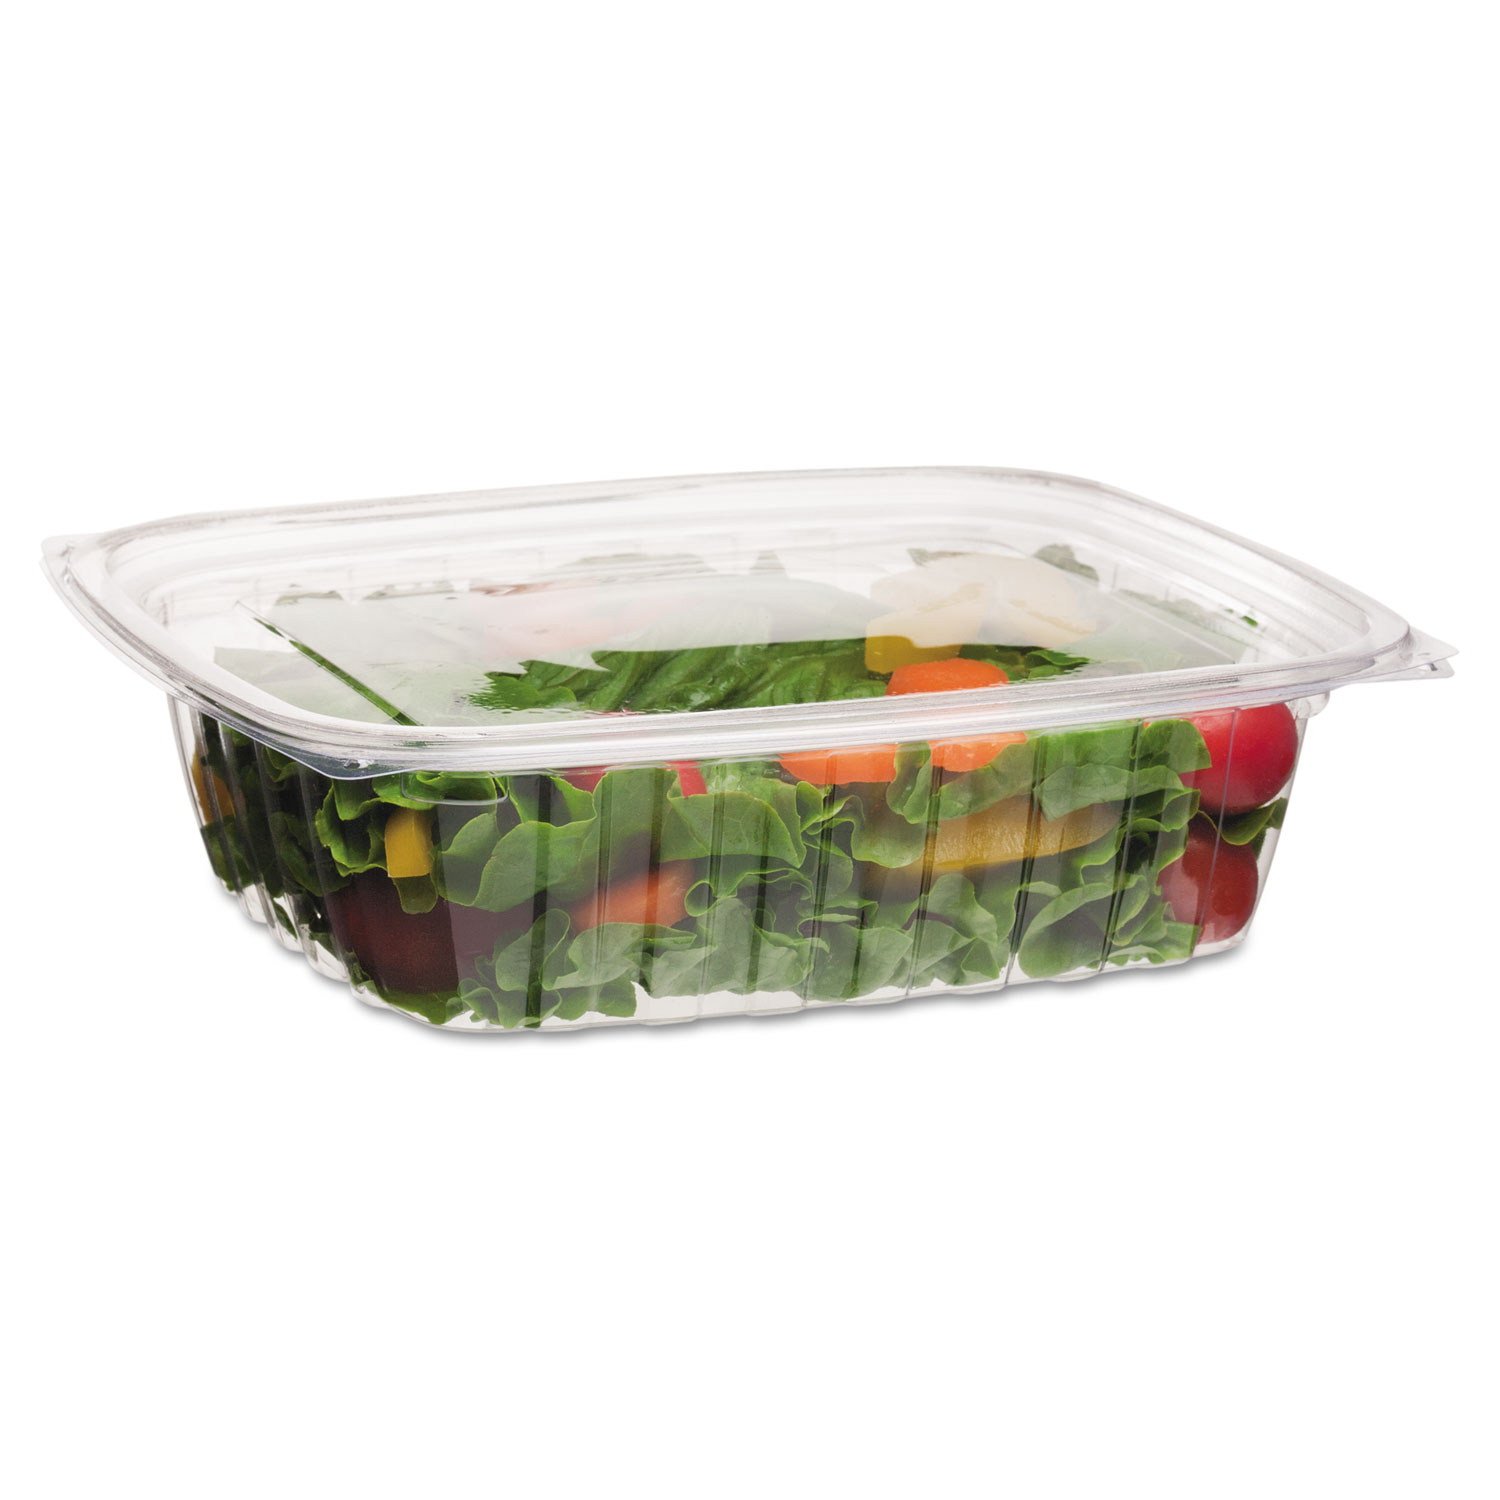  Eco-Products EP-RC48 Renewable and Compostable Rectangular Deli Containers, 48 oz, 50/Pack, 4 Packs/Carton (ECOEPRC48) 